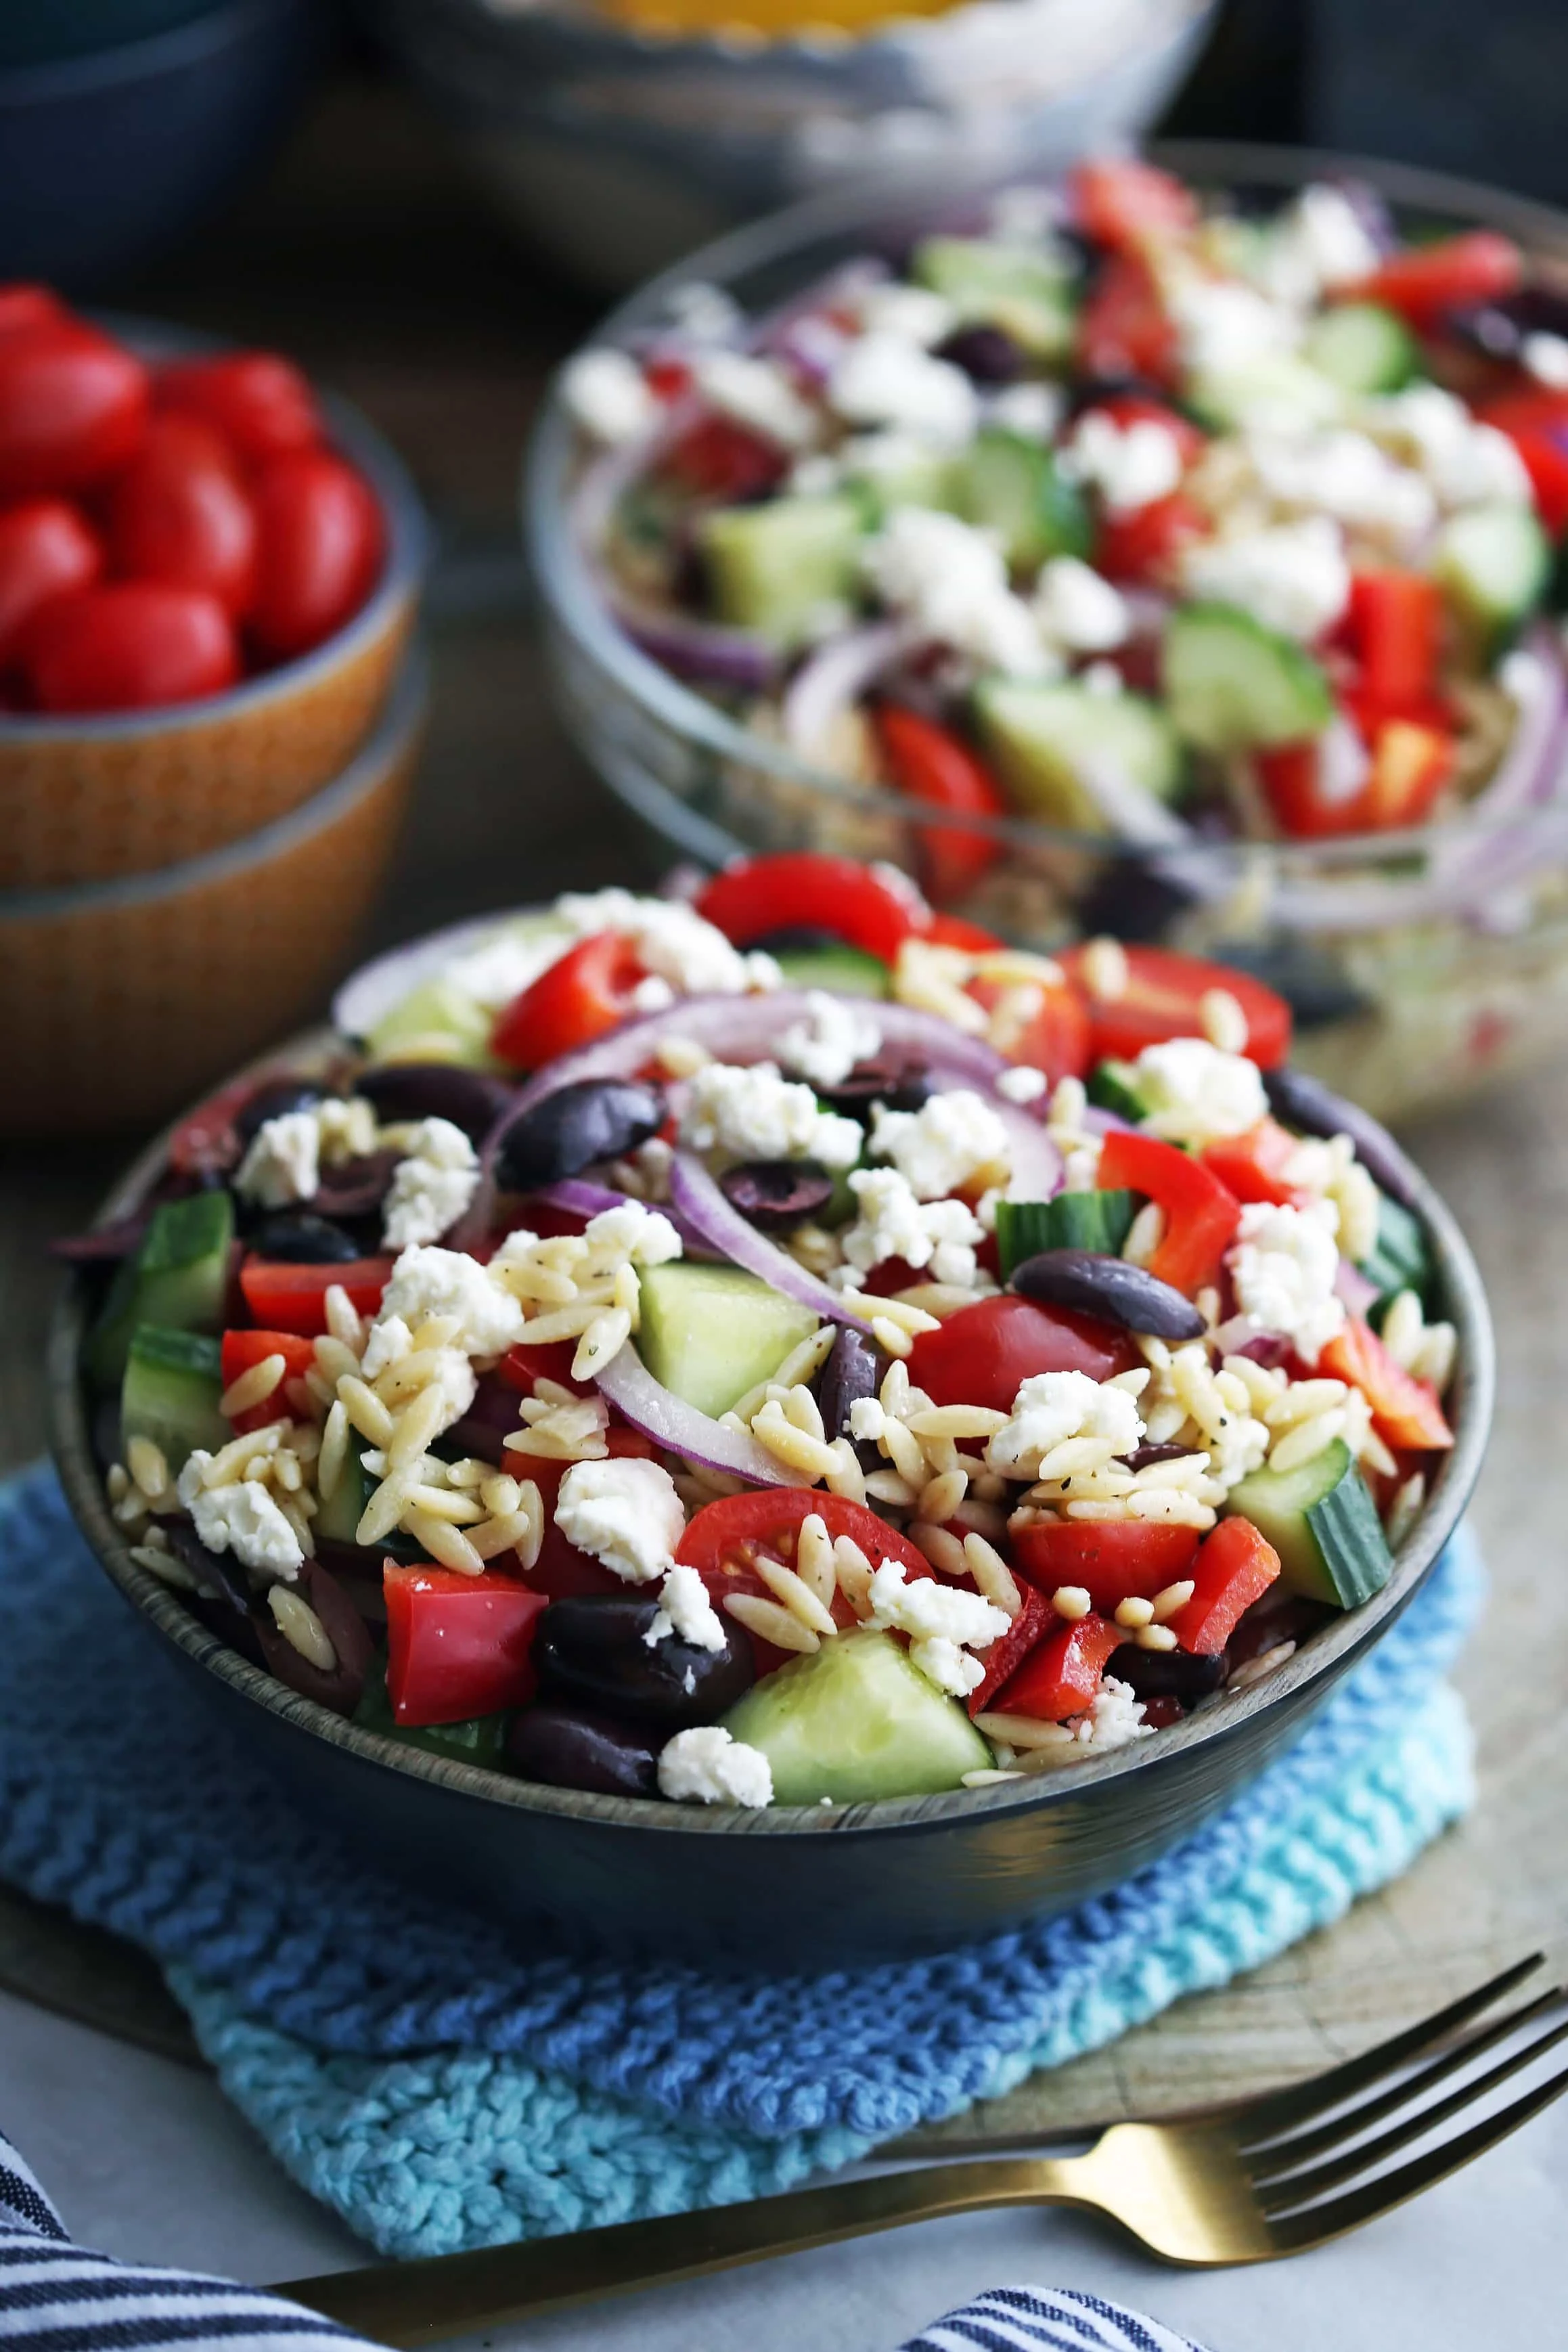 Greek orzo salad with crumbled feta, Kalamata olives, and raw vegetables in a dark brown bowl and a large glass bowl.